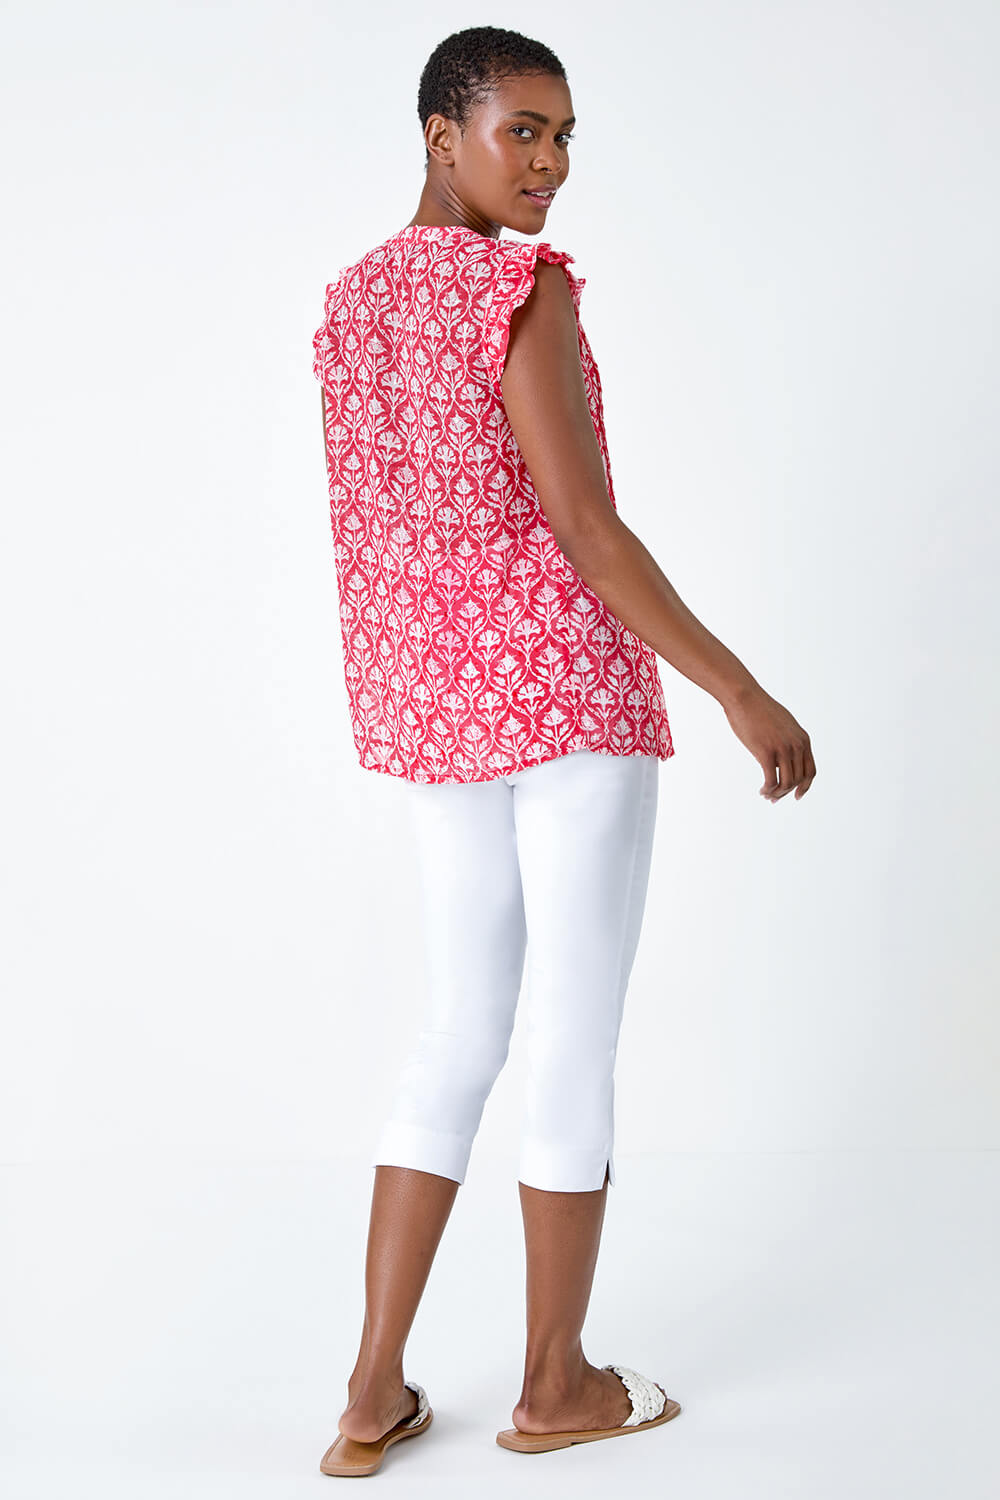 PINK Frill Sleeve Floral Print Blouse, Image 3 of 5